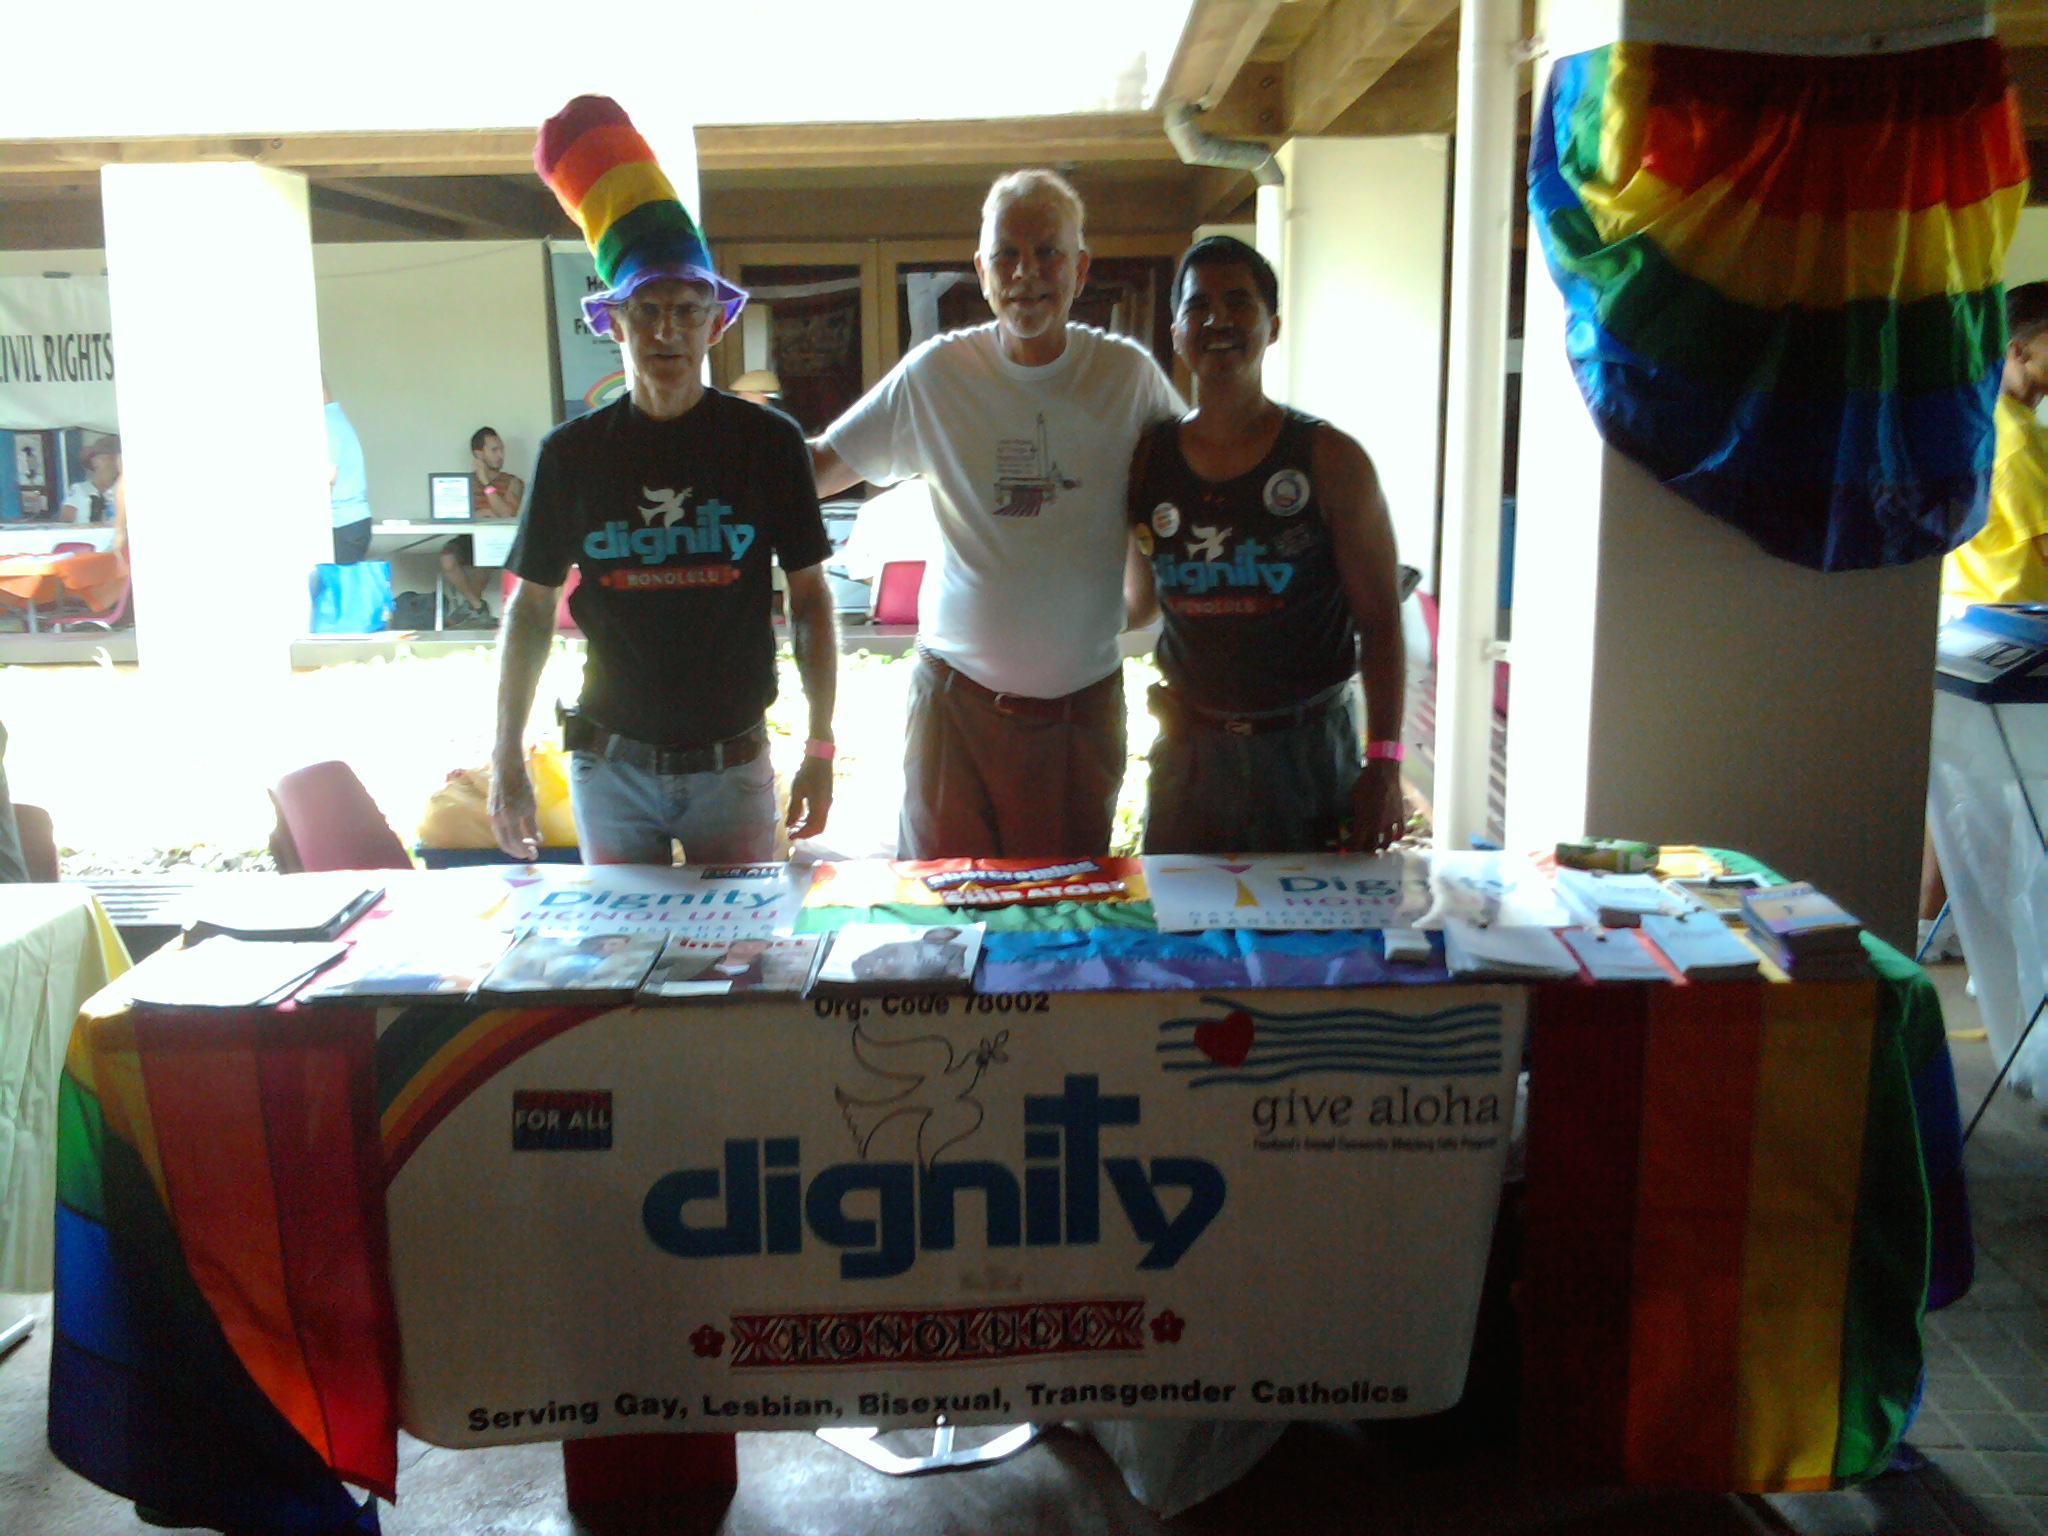 Dignity Table at Pride Festival